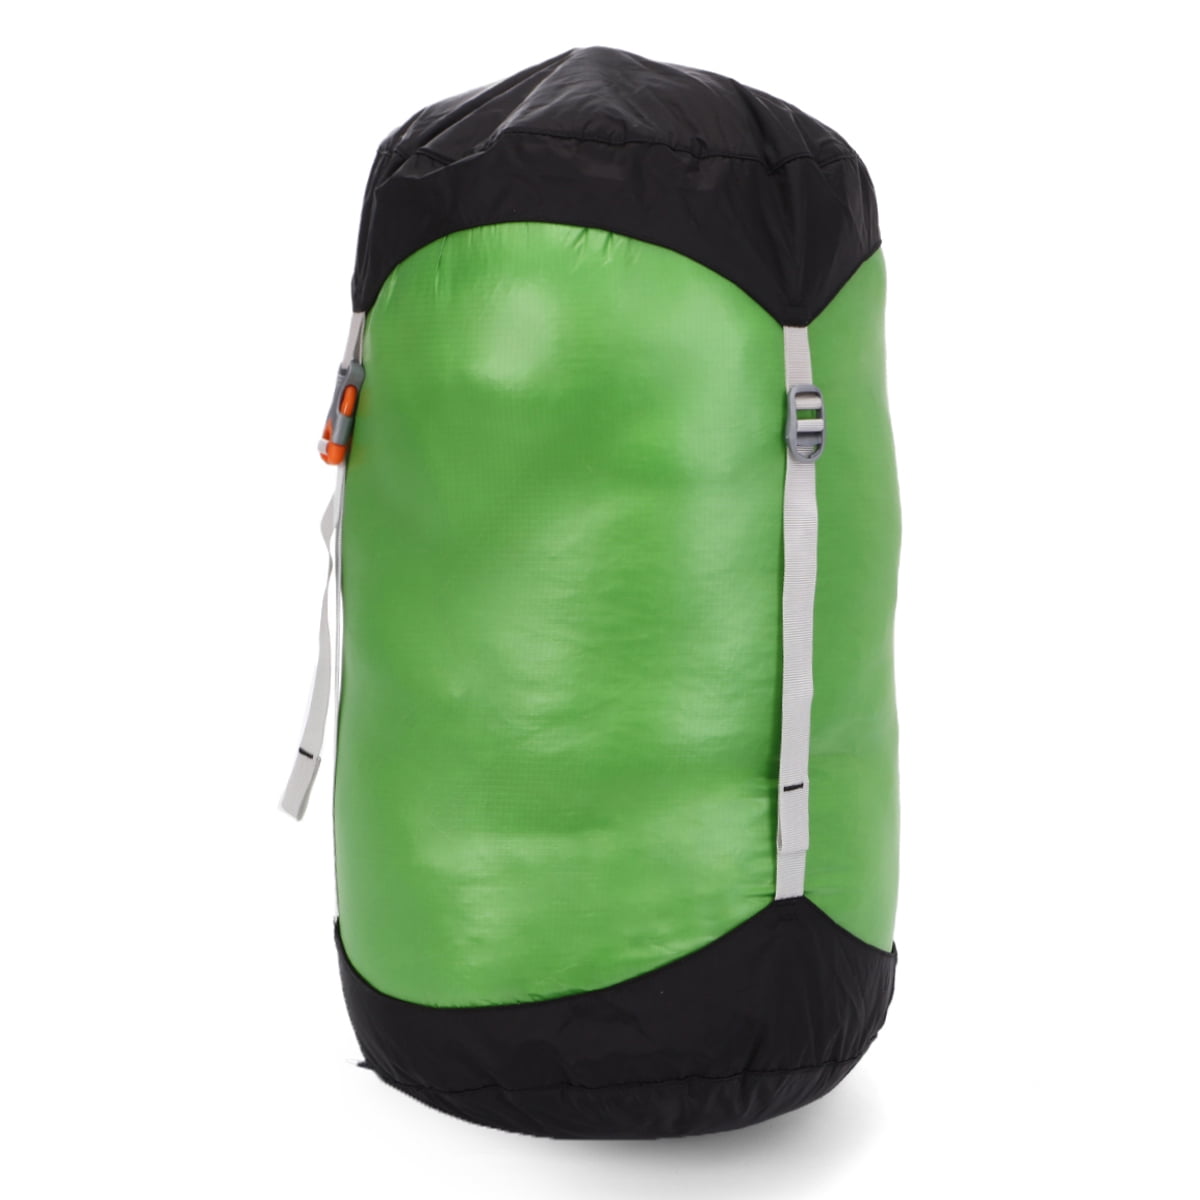 Details about   Bag Sleeping Camping Hiking Outdoor Survival Thermal Weather Envelope Warm Cold 